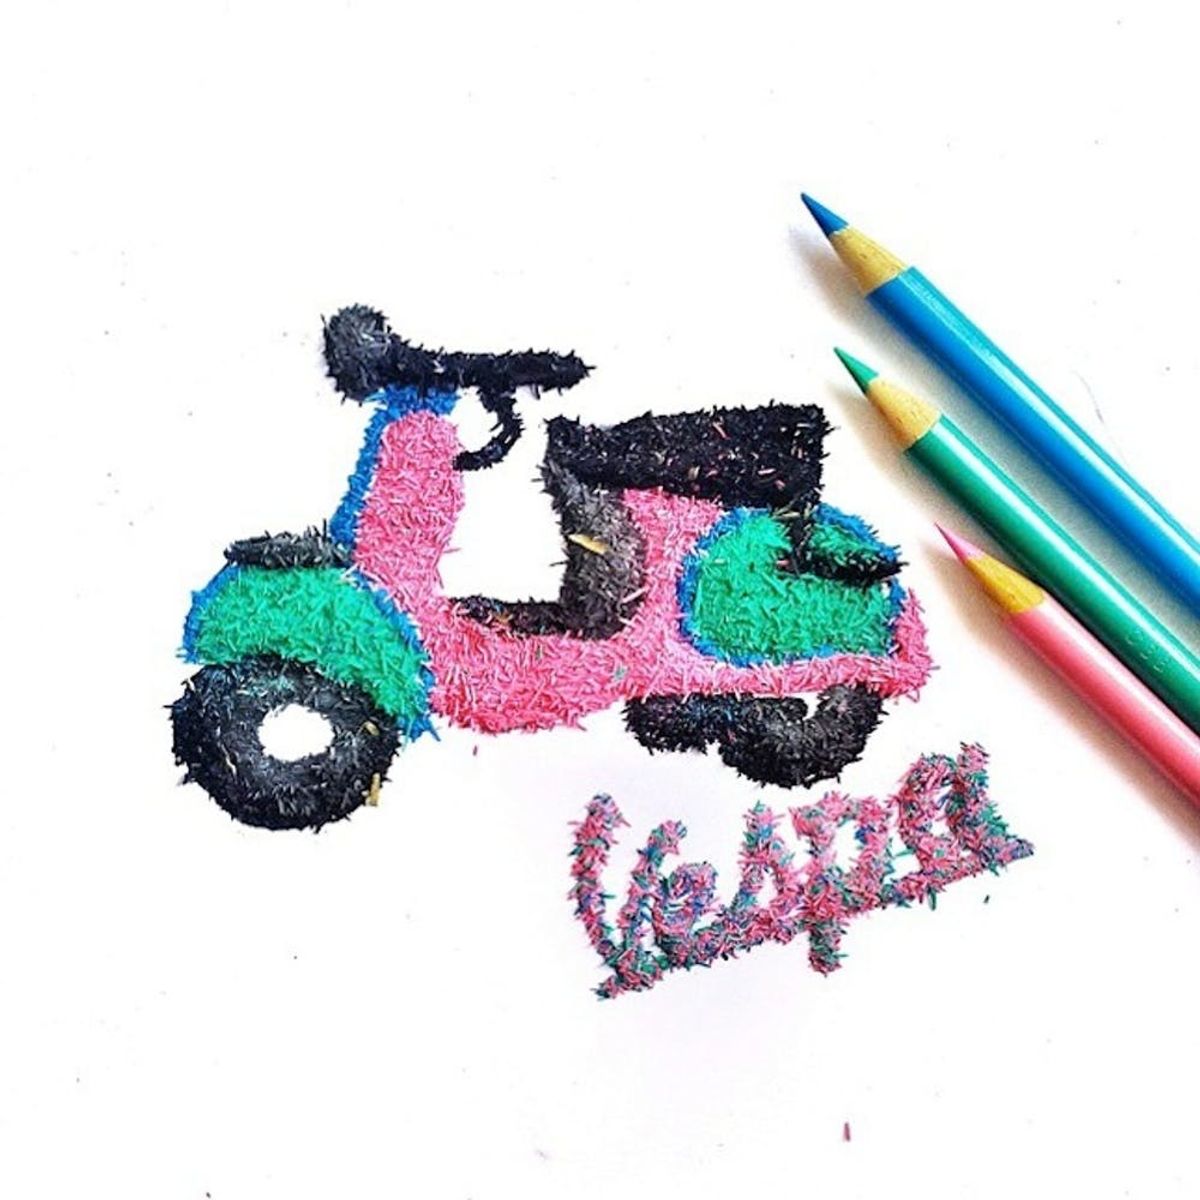 See What This Artist Created from Pencil Shavings